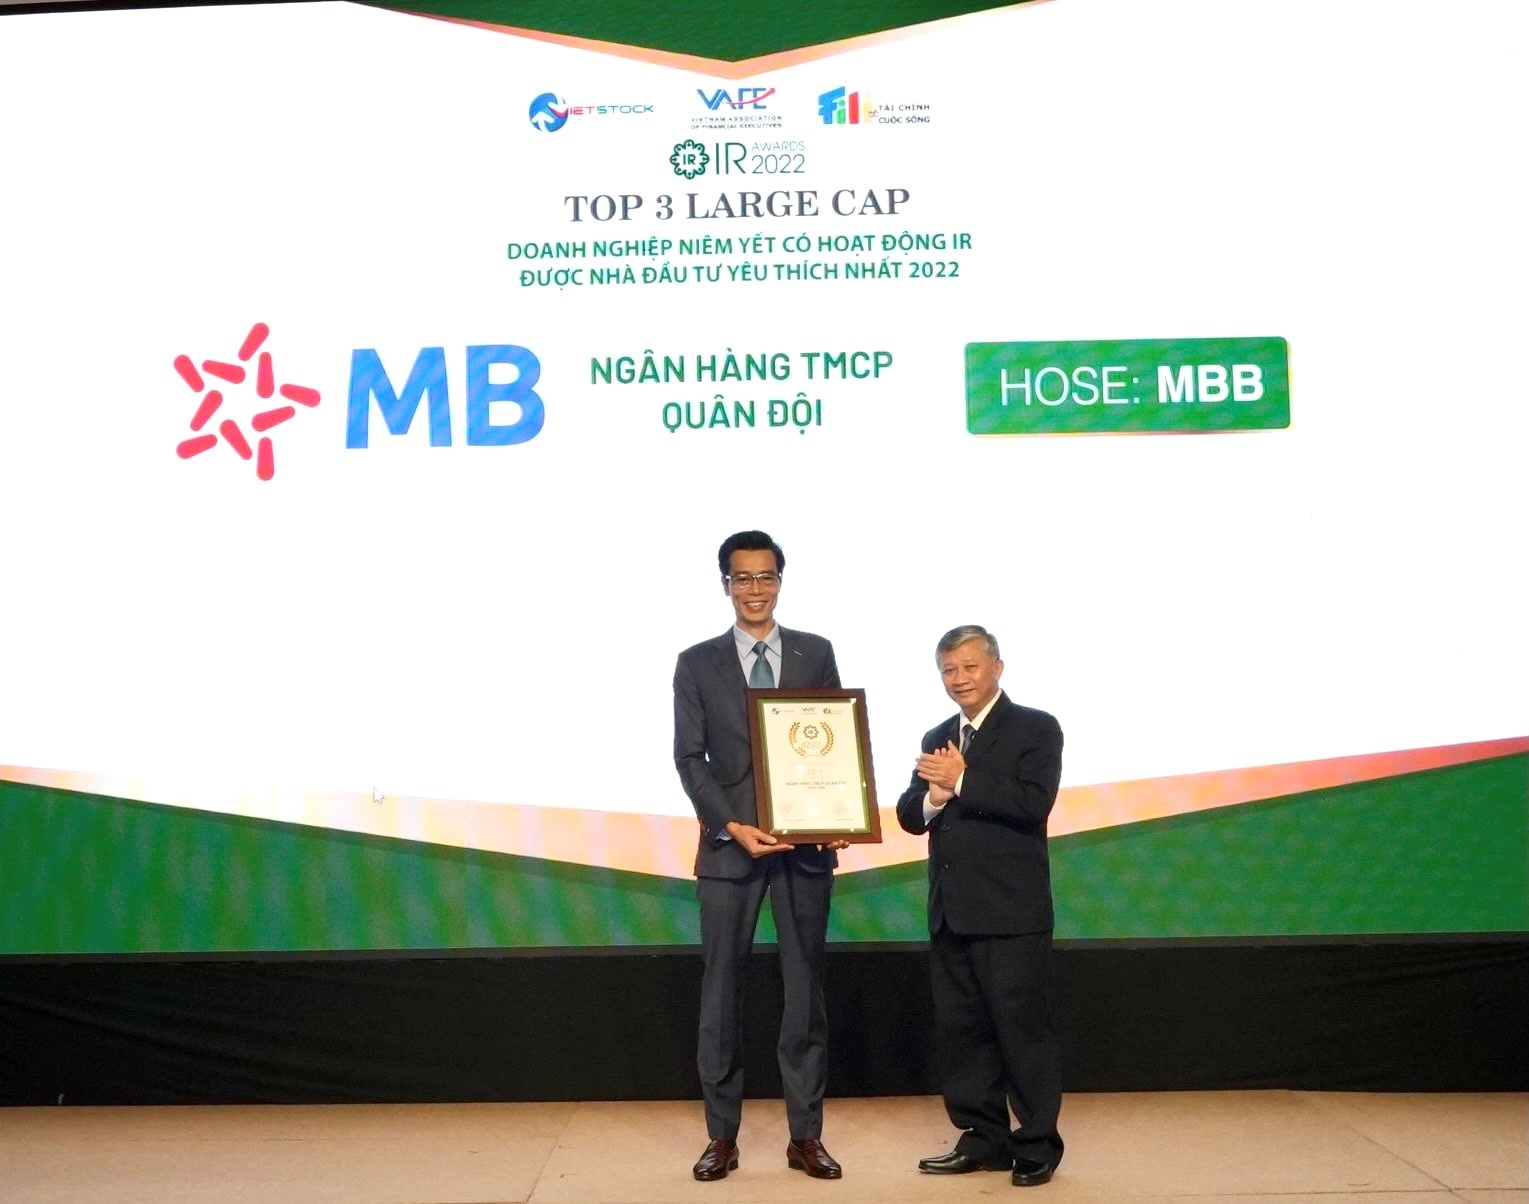 MB selected as Top 3 favoured listed company by investors